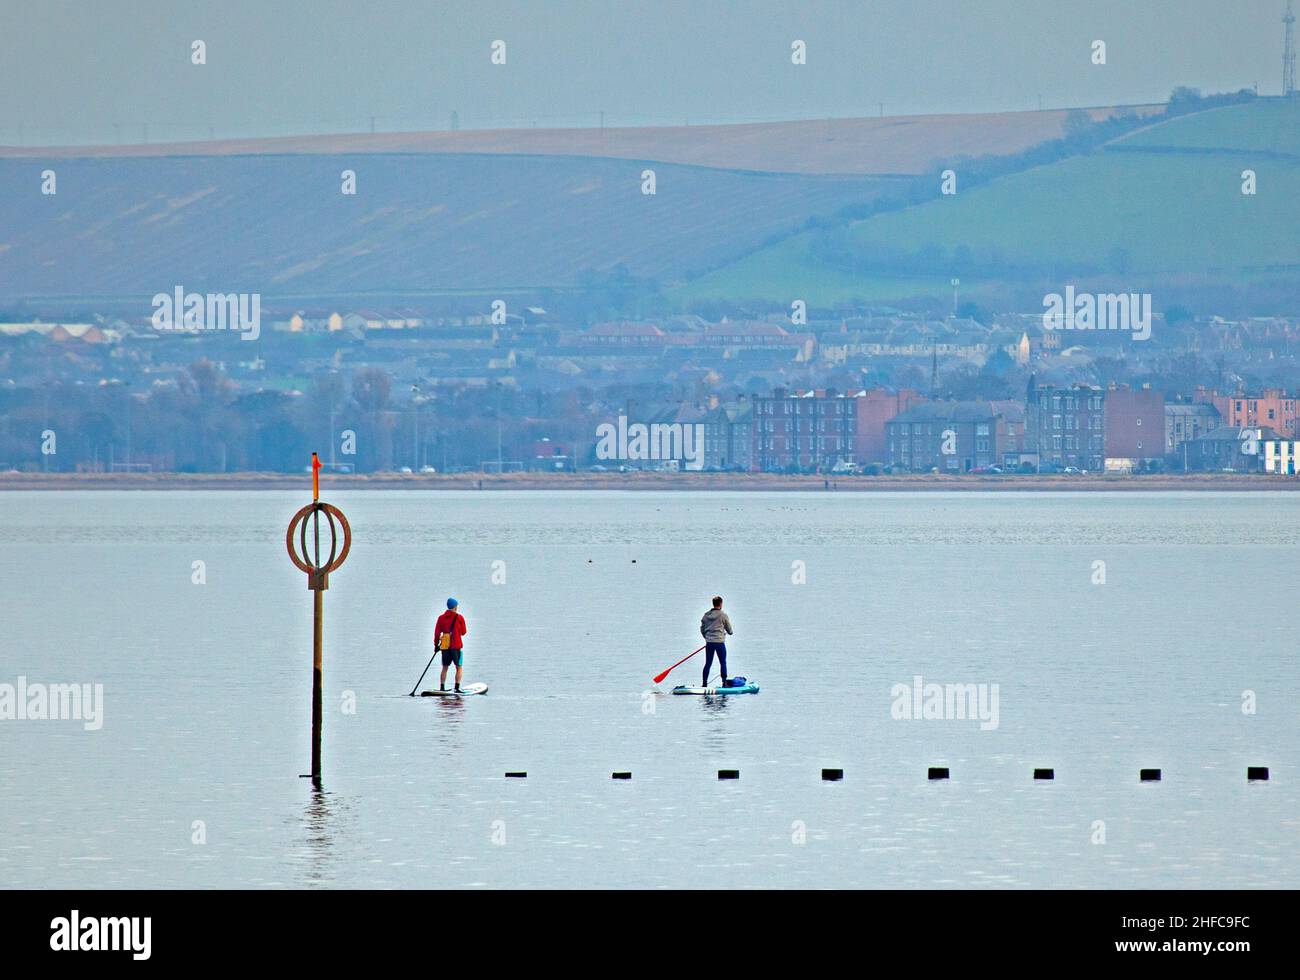 Portobello, Edinburgh, Scotland, UK. 15th January 2022.  Calm Firth of Forth for another cloudy afternoon, temperature of 7 degrees centigrade for those engaged in watersports. Pictured: Two males on paddleboards enjoy the calm conditions with East Lothian in the background. Credit: Archwhite/Alamy Live News. Stock Photo